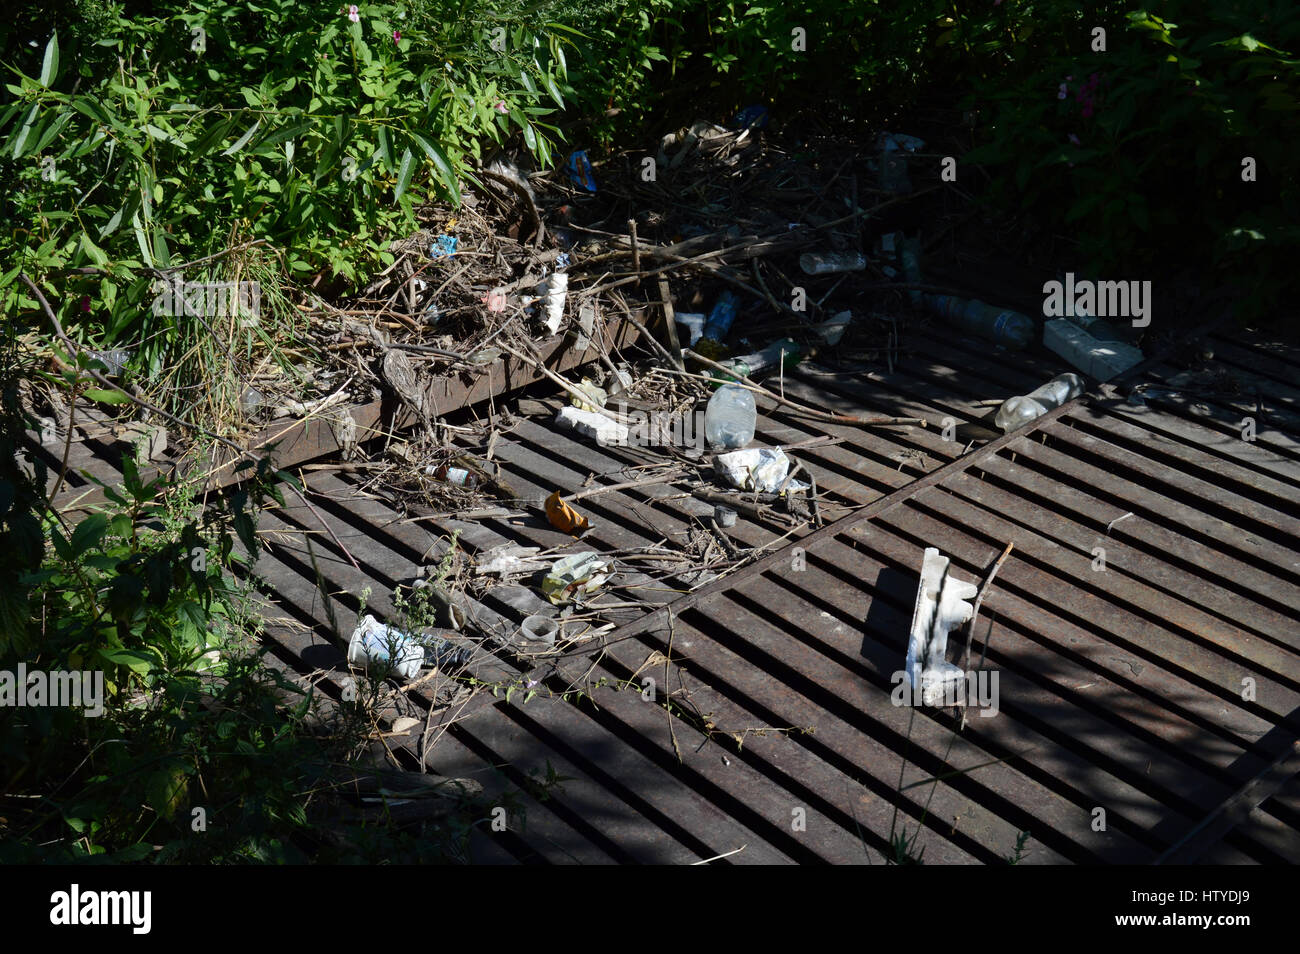 KOVROV, RUSSIA - JULY 25, 2015: Drainage ditch littered with debris Stock Photo